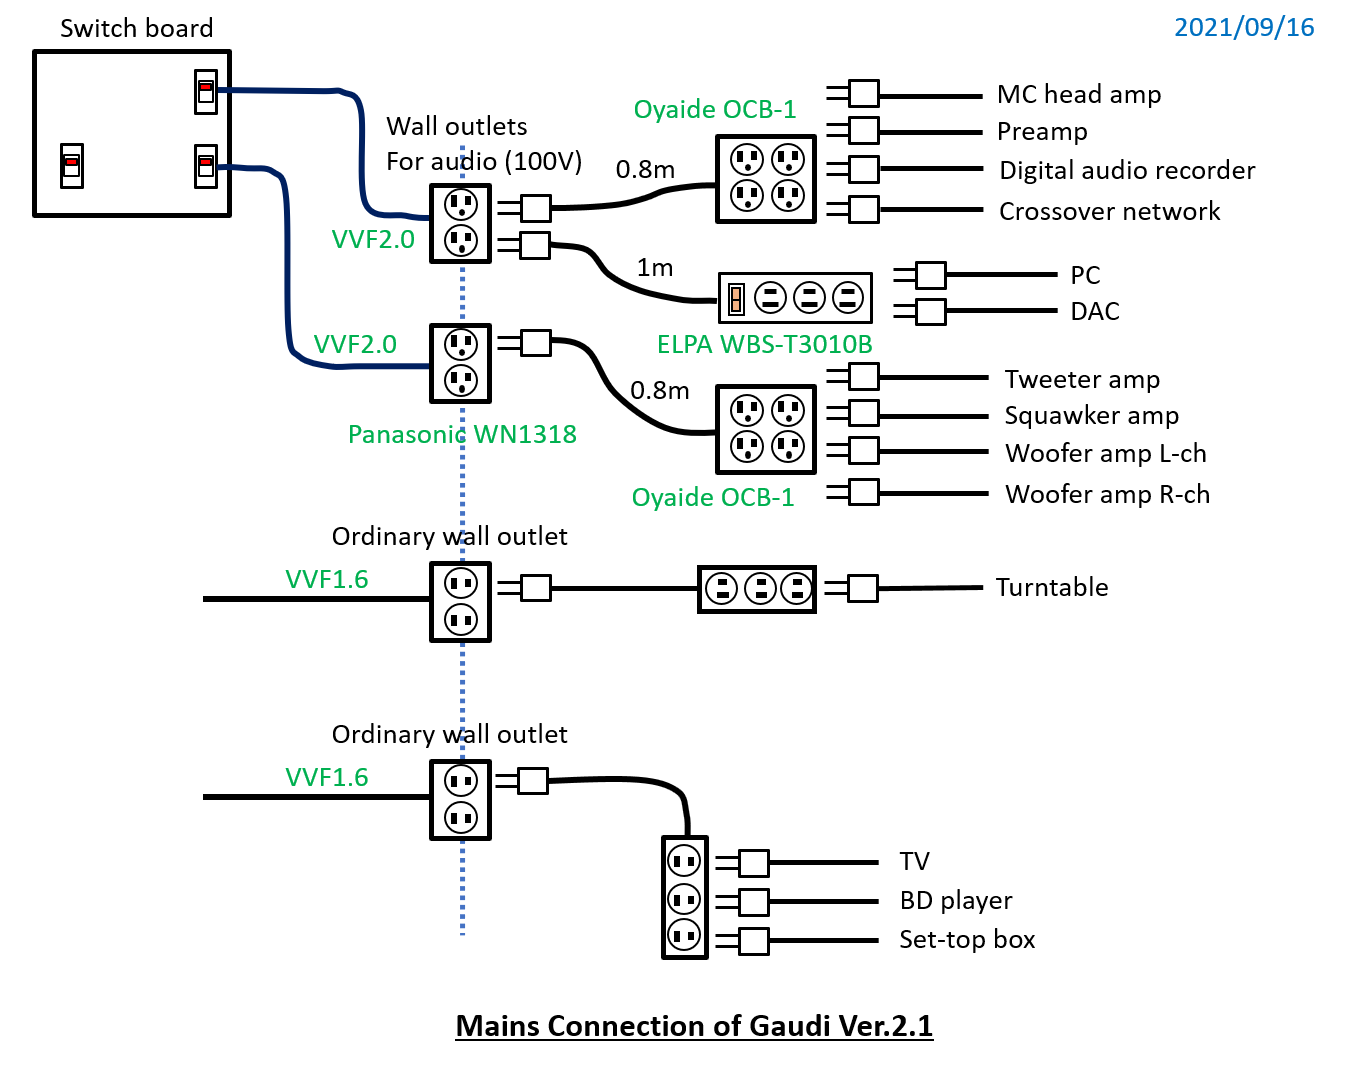 Mains Connection of Gaudi Ver.2.1